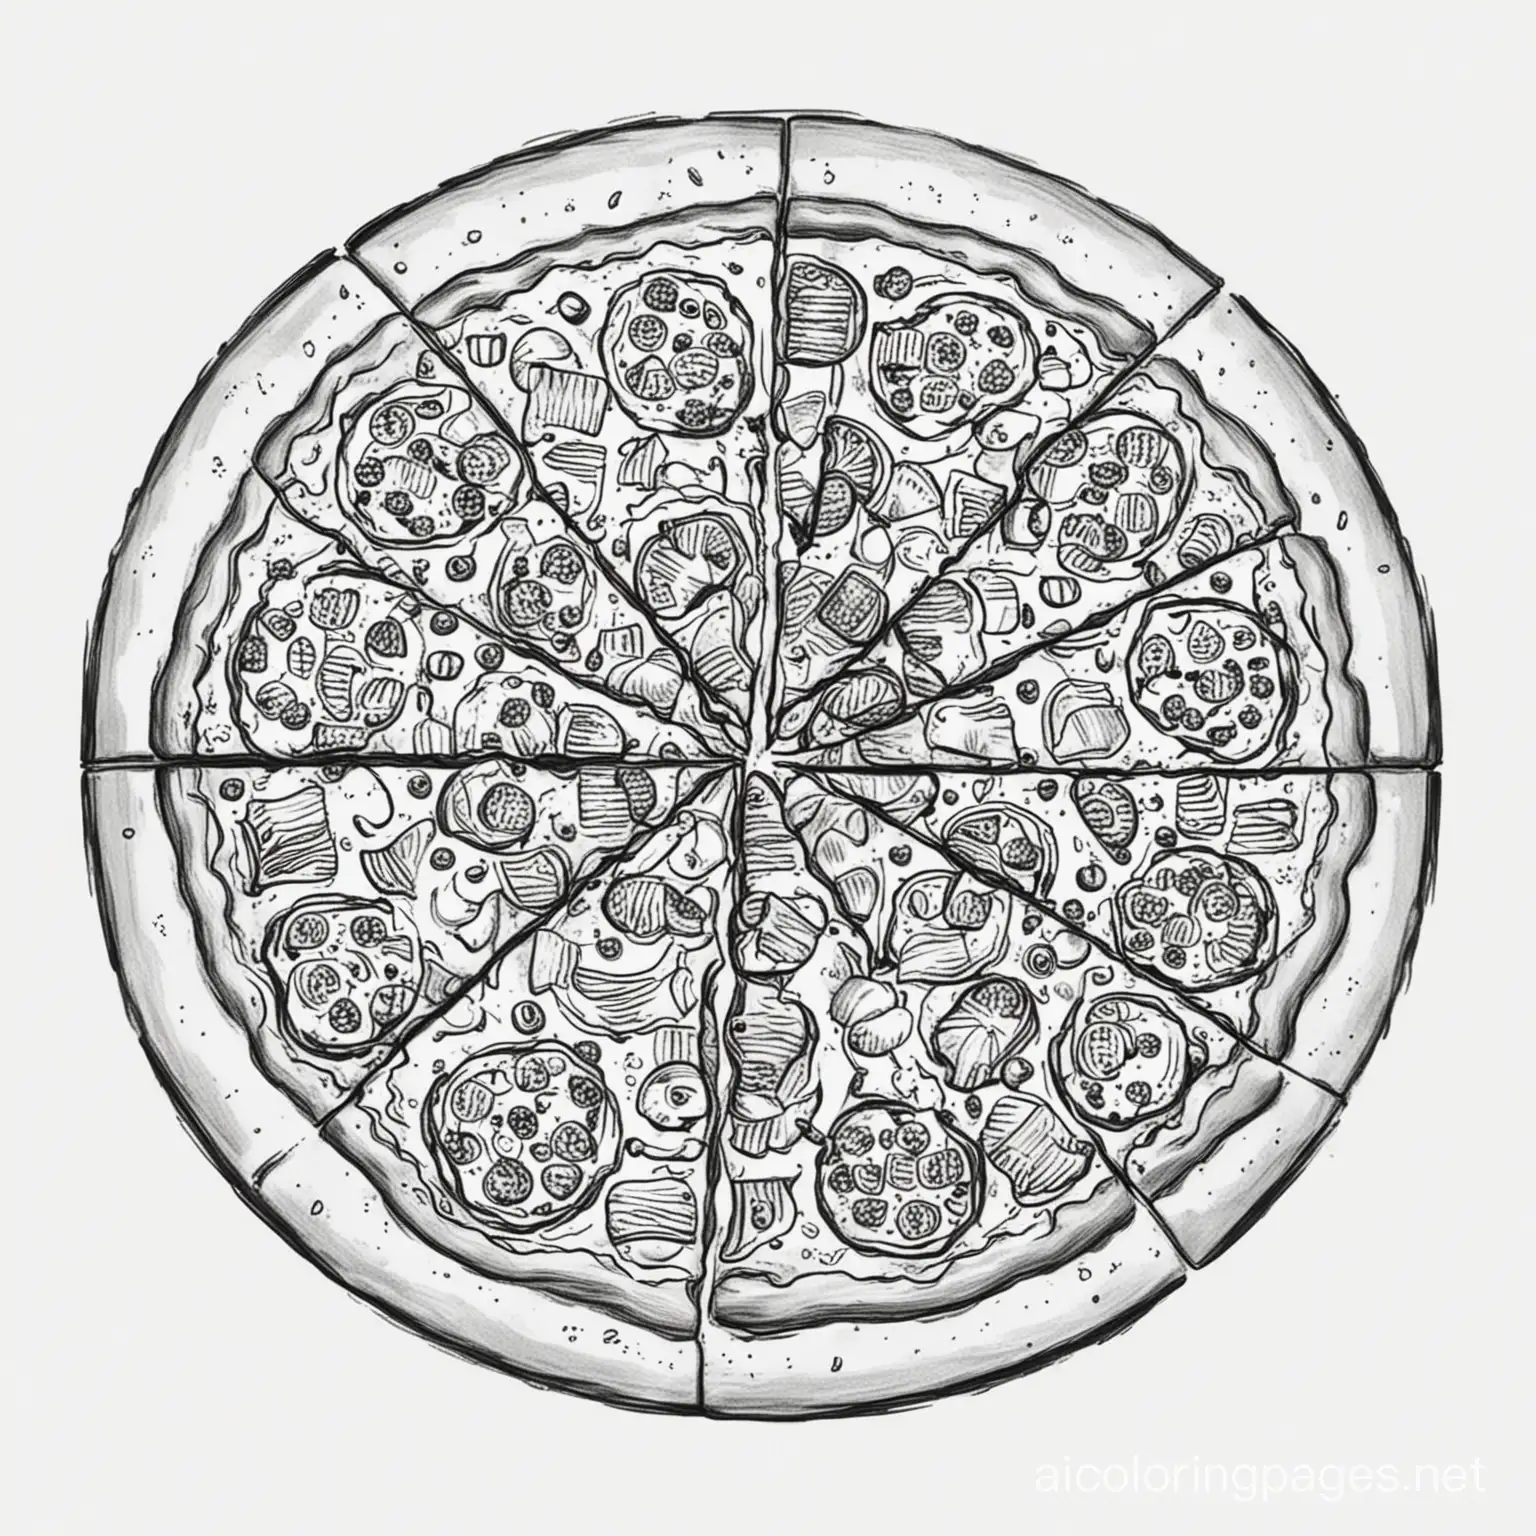 Simple-Pizza-Coloring-Page-for-Kids-Black-and-White-Line-Art-on-White-Background